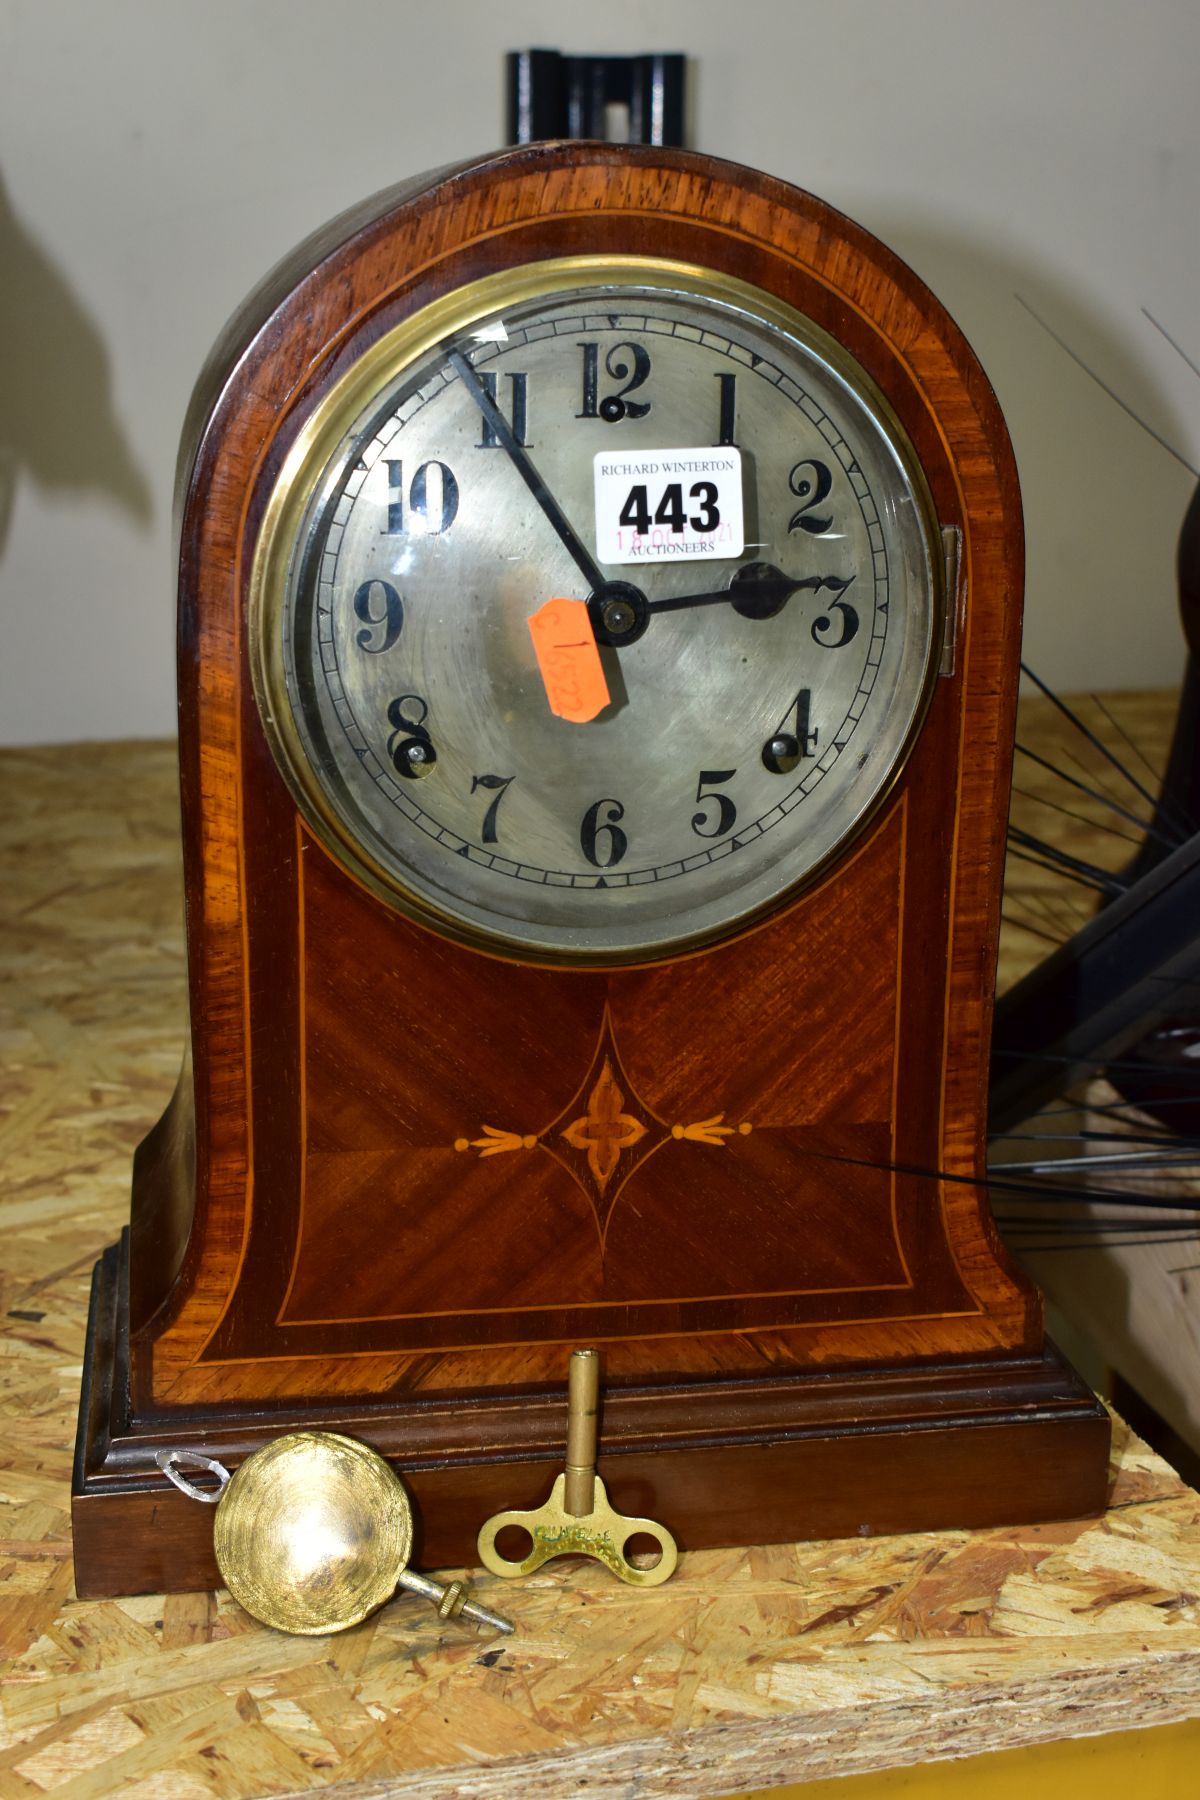 AN EDWARDIAN MAHOGANY AND INLAID MANTEL CLOCK, circular silvered dial with Arabic numerals, eight